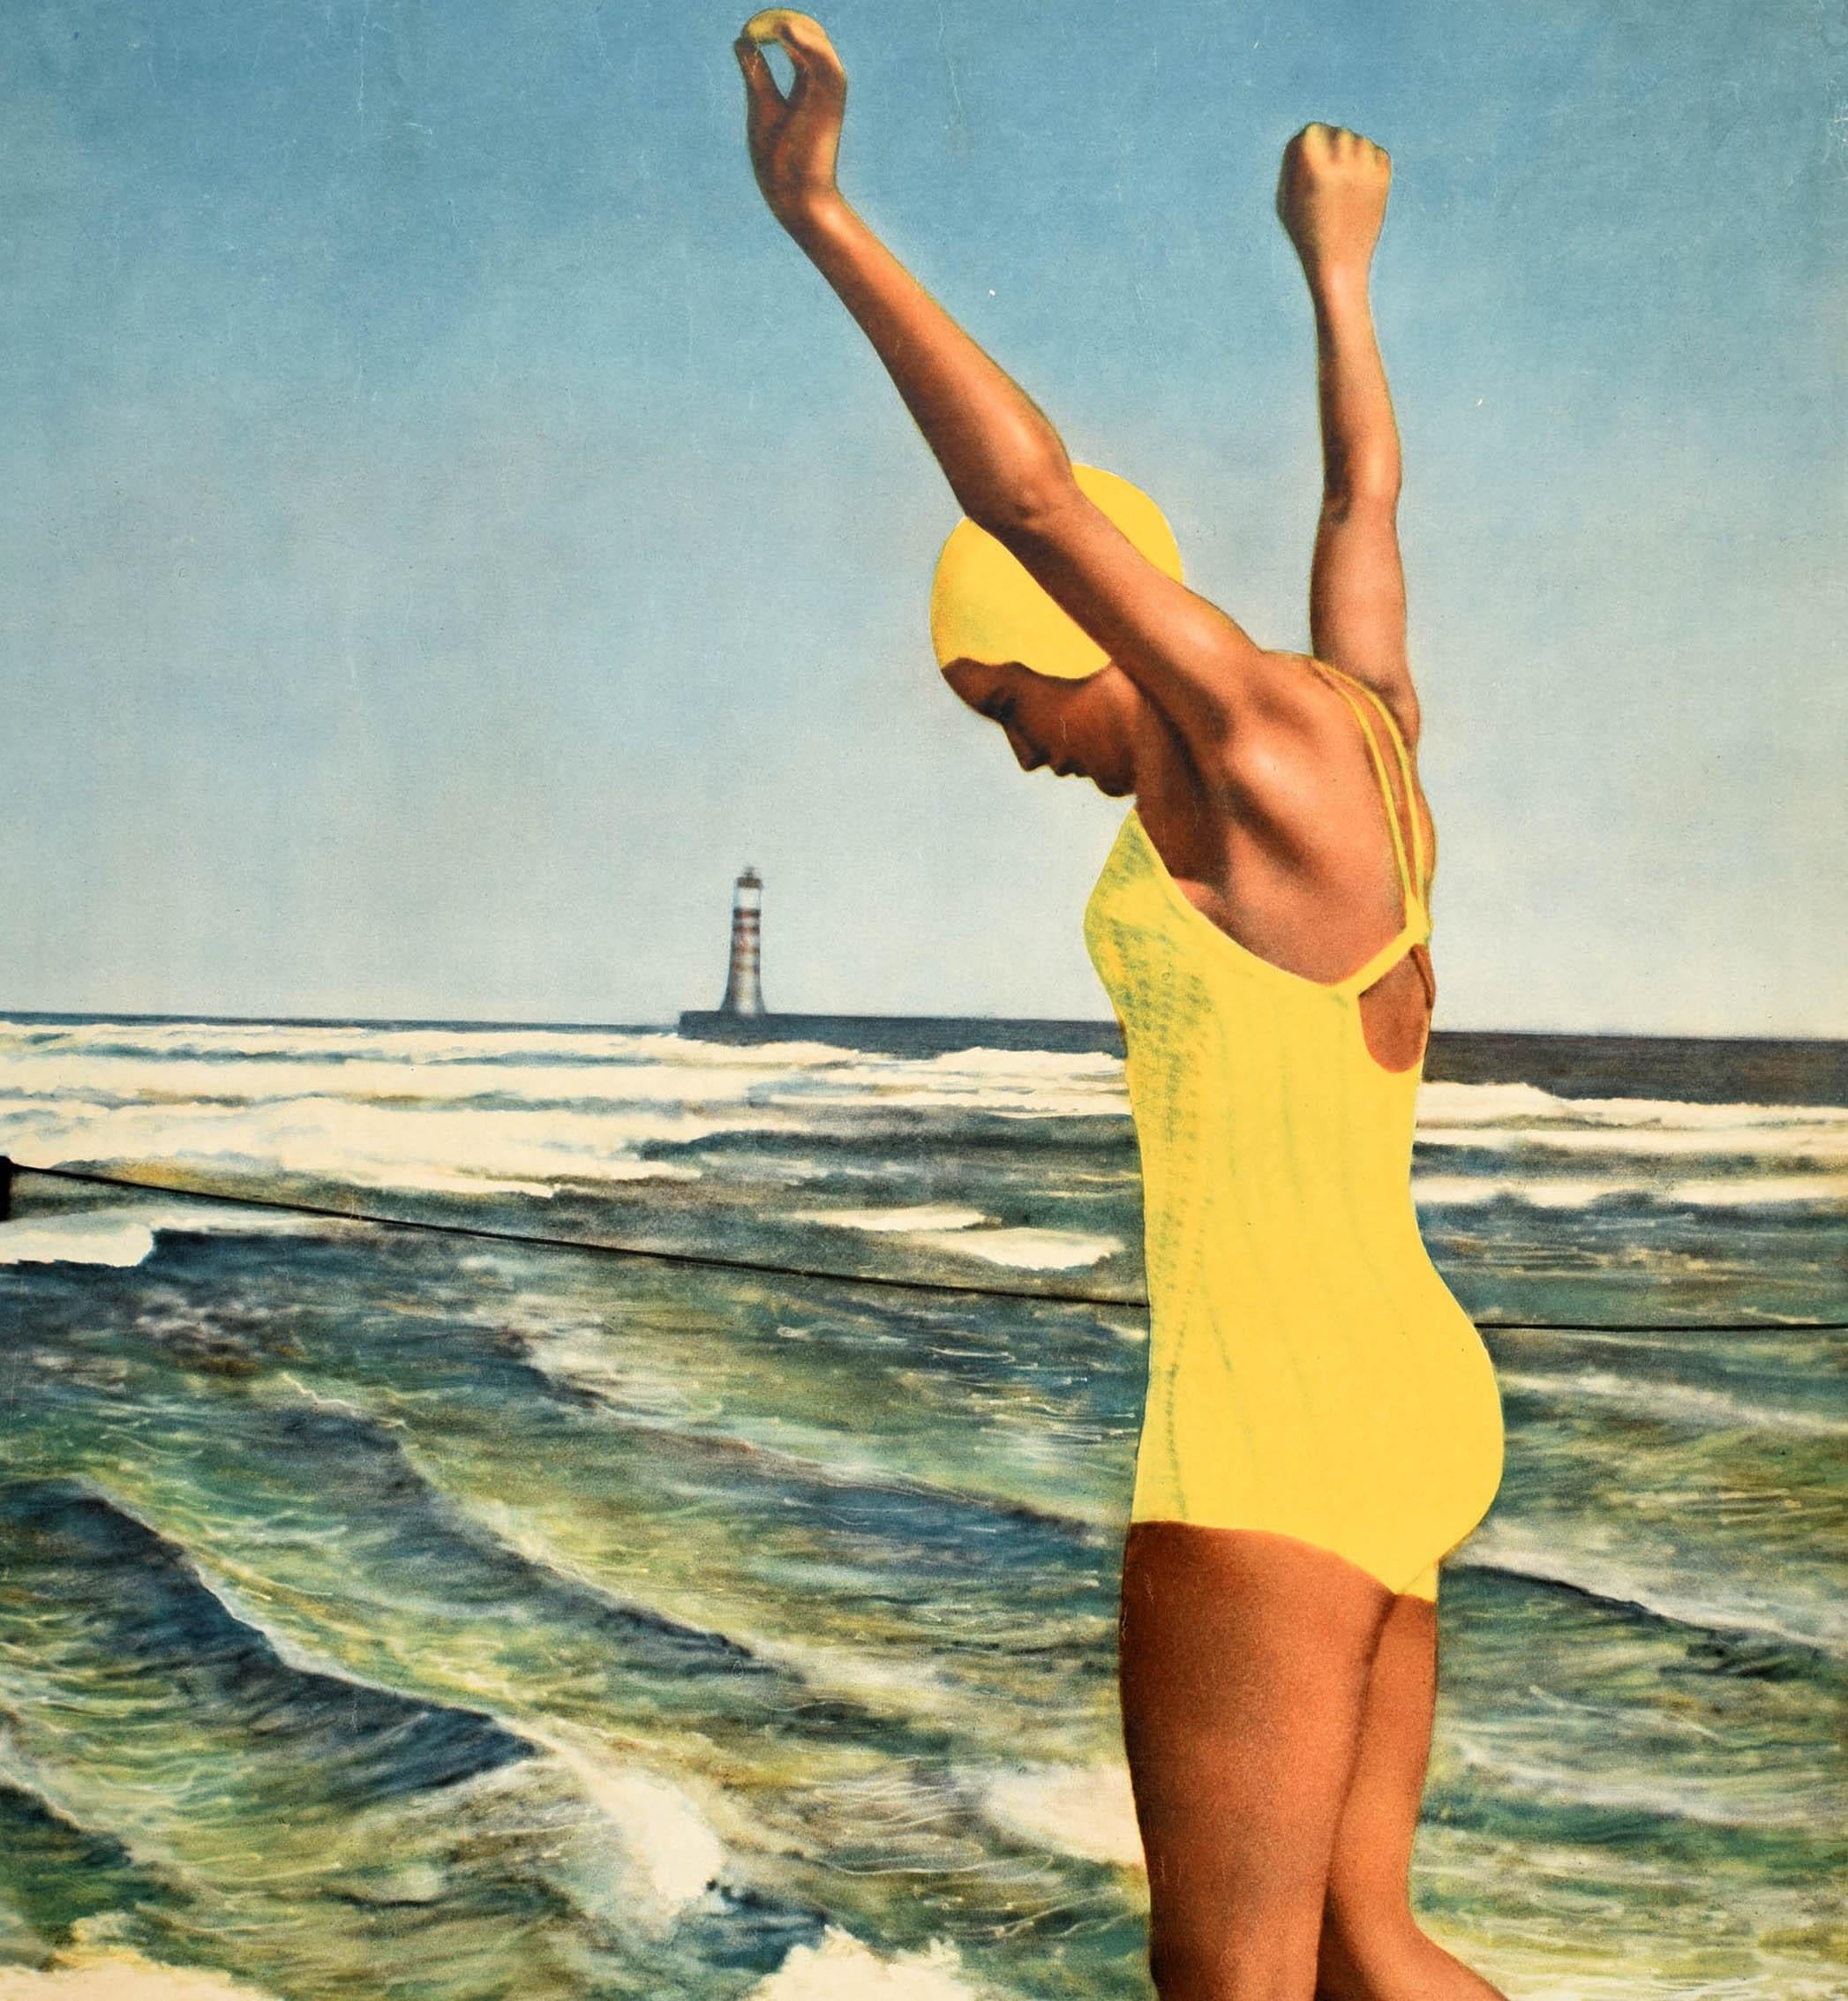 Original vintage travel poster - A Sunny Holiday on the German Coast - featuring a lady in a yellow swimming costume with a swim hat and beach shoes walking into the sea with her arms raised, a rope marking the safe swimming area for the summer